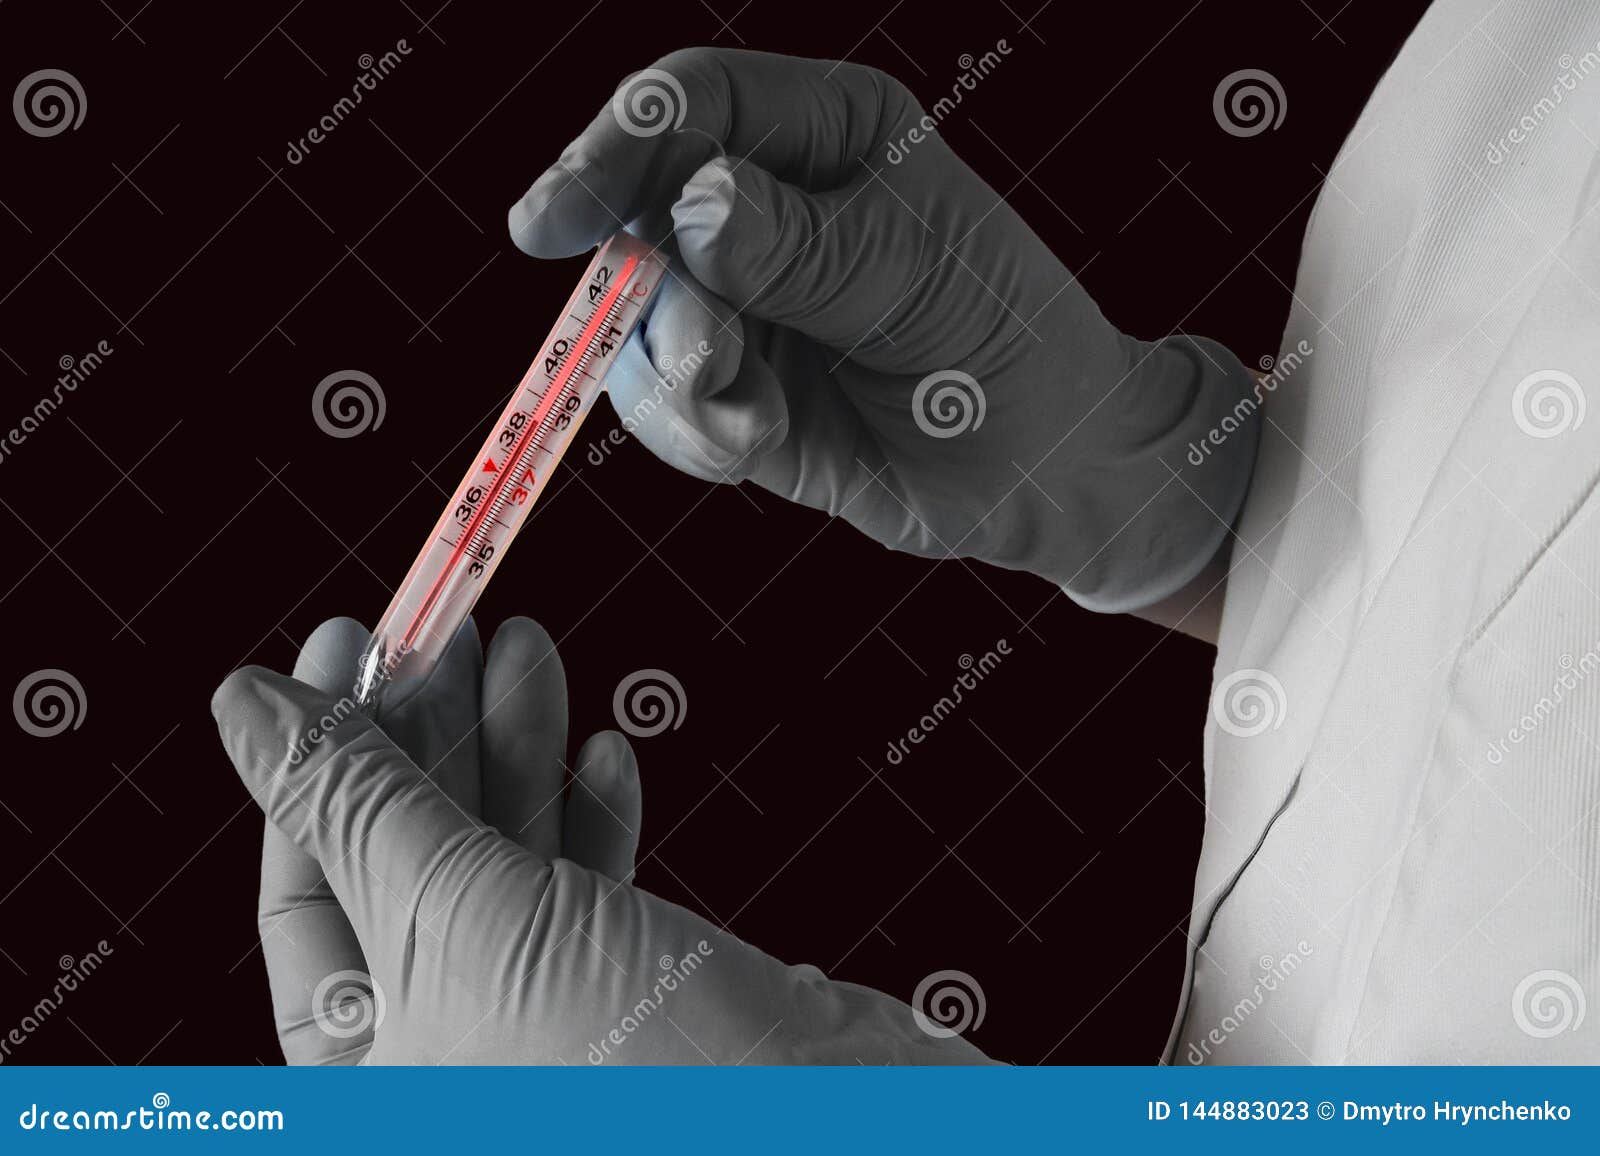 high temperature measurement. fever or flu virus epidemy concept. two hands in gloves hold a thermometer with hot red scale on